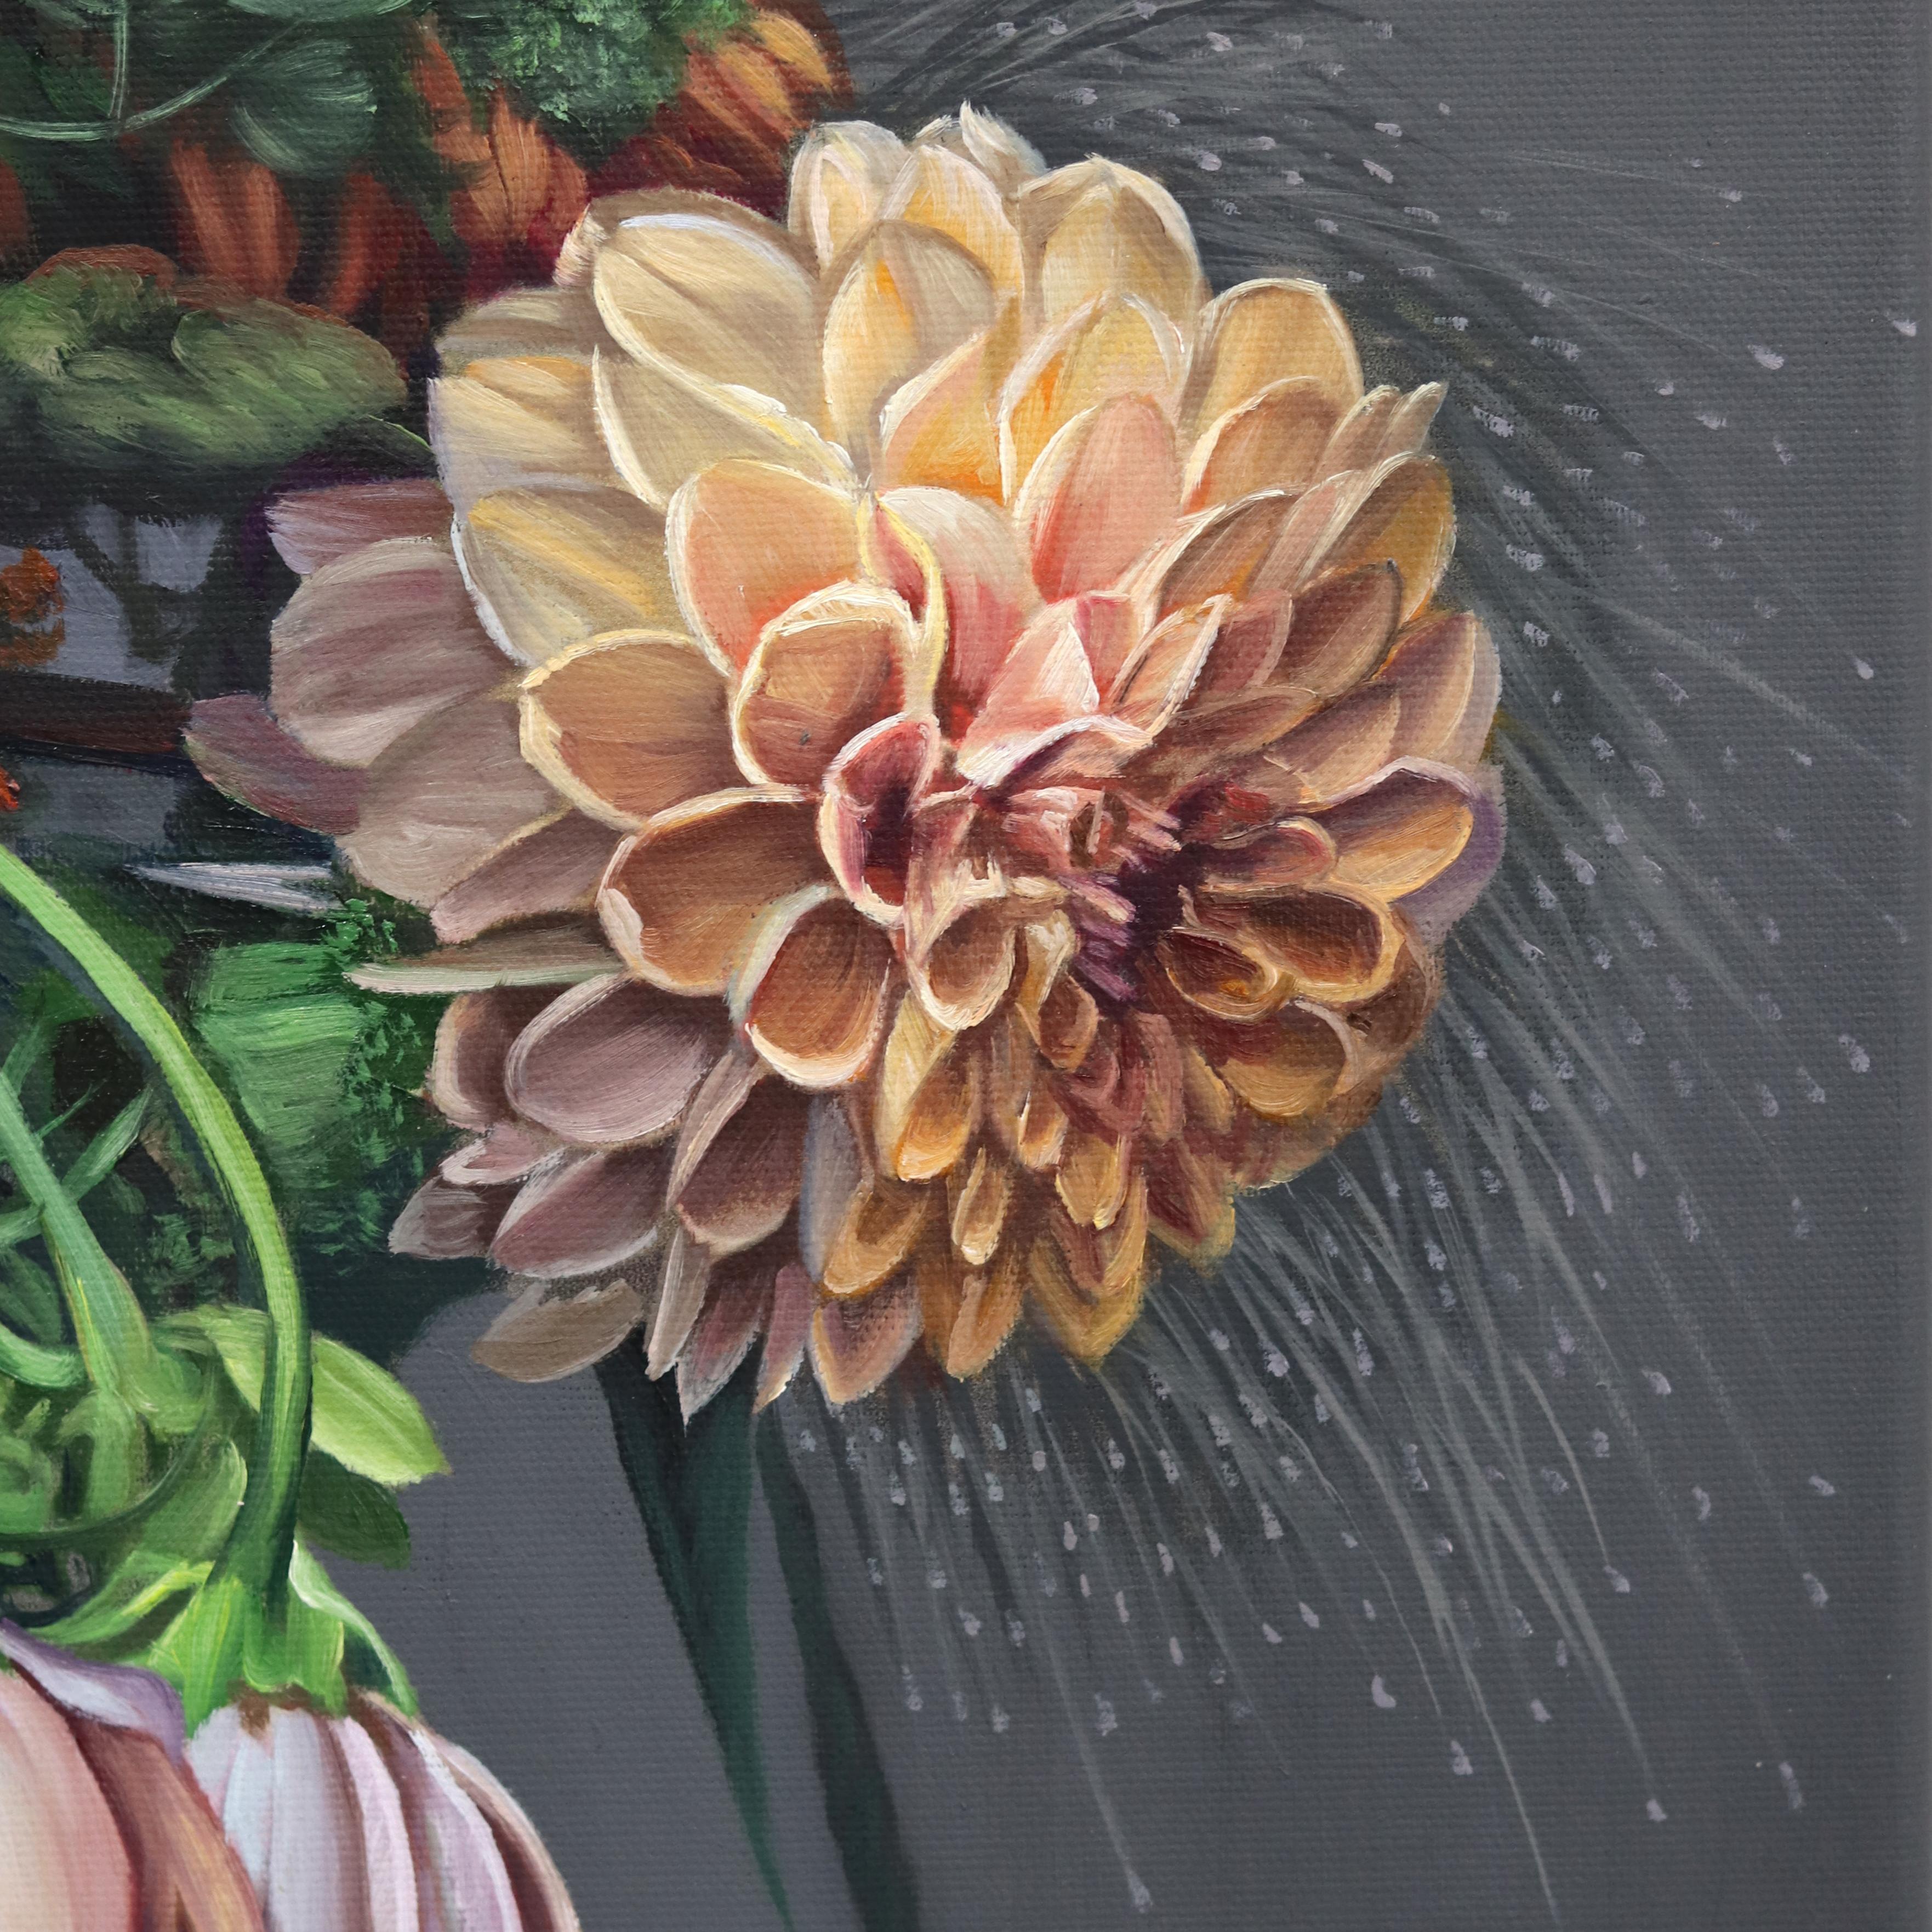 Touching Souls - Hyperrealist Floral Still Life Oil Painting 8